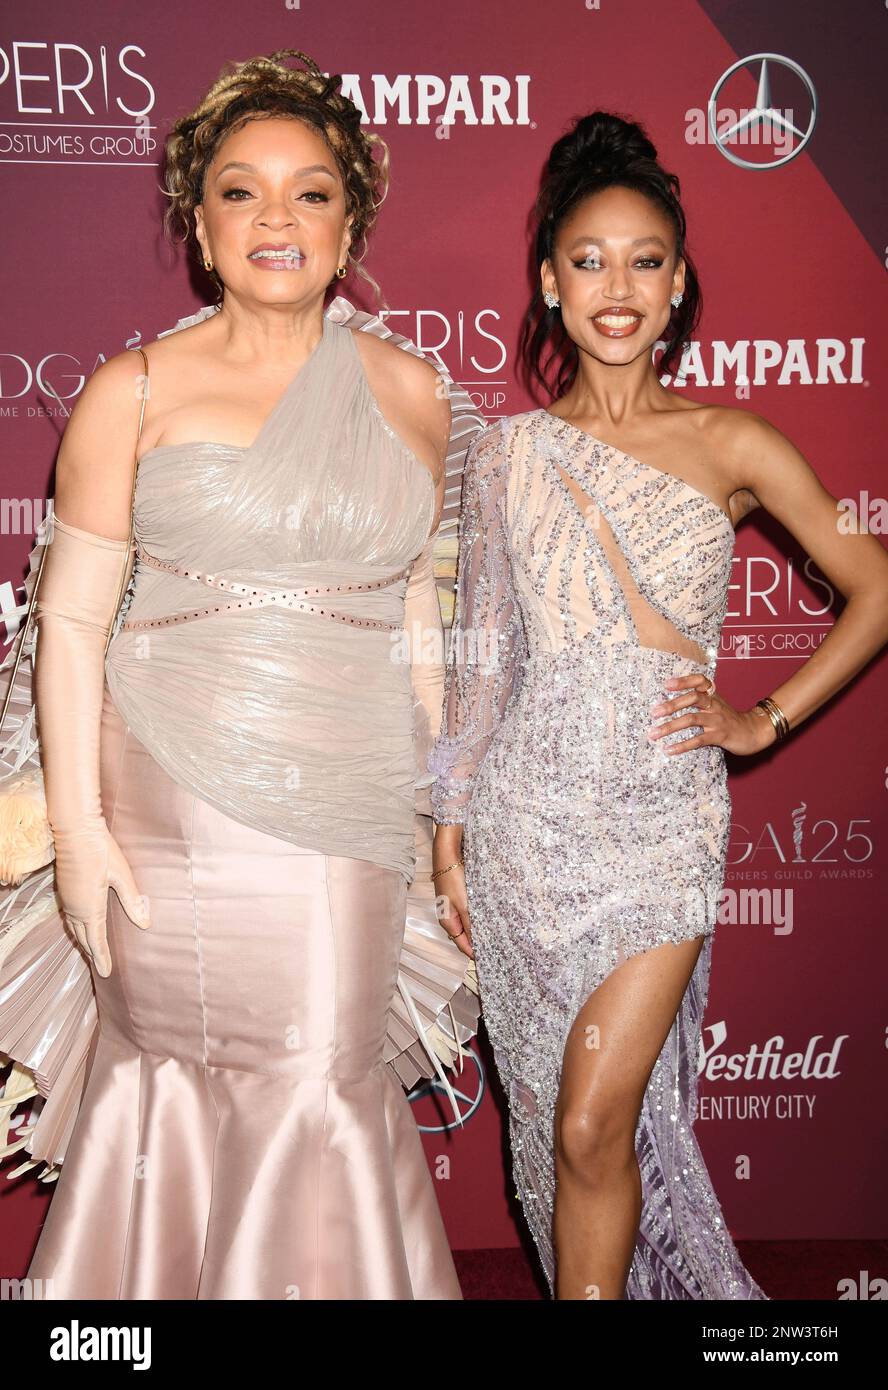 Los Angeles, California, USA. 27th Feb, 2023. (L-R) Ruth E. Carter and D'on Lauren Edwards attend the 25th Annual Costume Designers Guild Awards at the Fairmont Century Plaza on February 27, 2023 in Los Angeles, California. Credit: Jeffrey Mayer/Jtm Photos/Media Punch/Alamy Live News Stock Photo